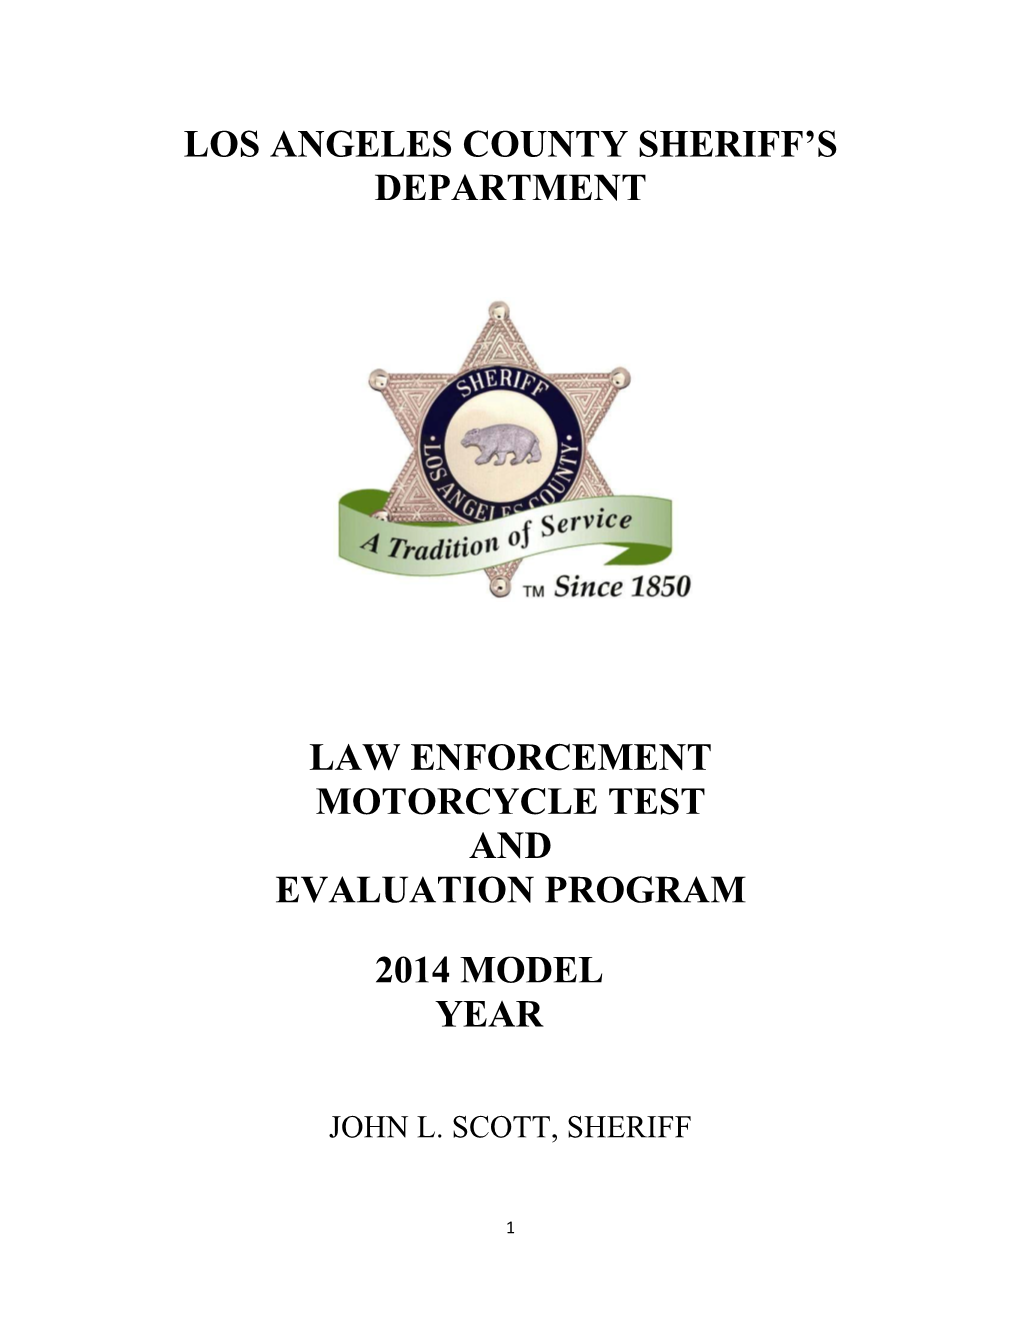 Los Angeles County Sheriff's Department Law